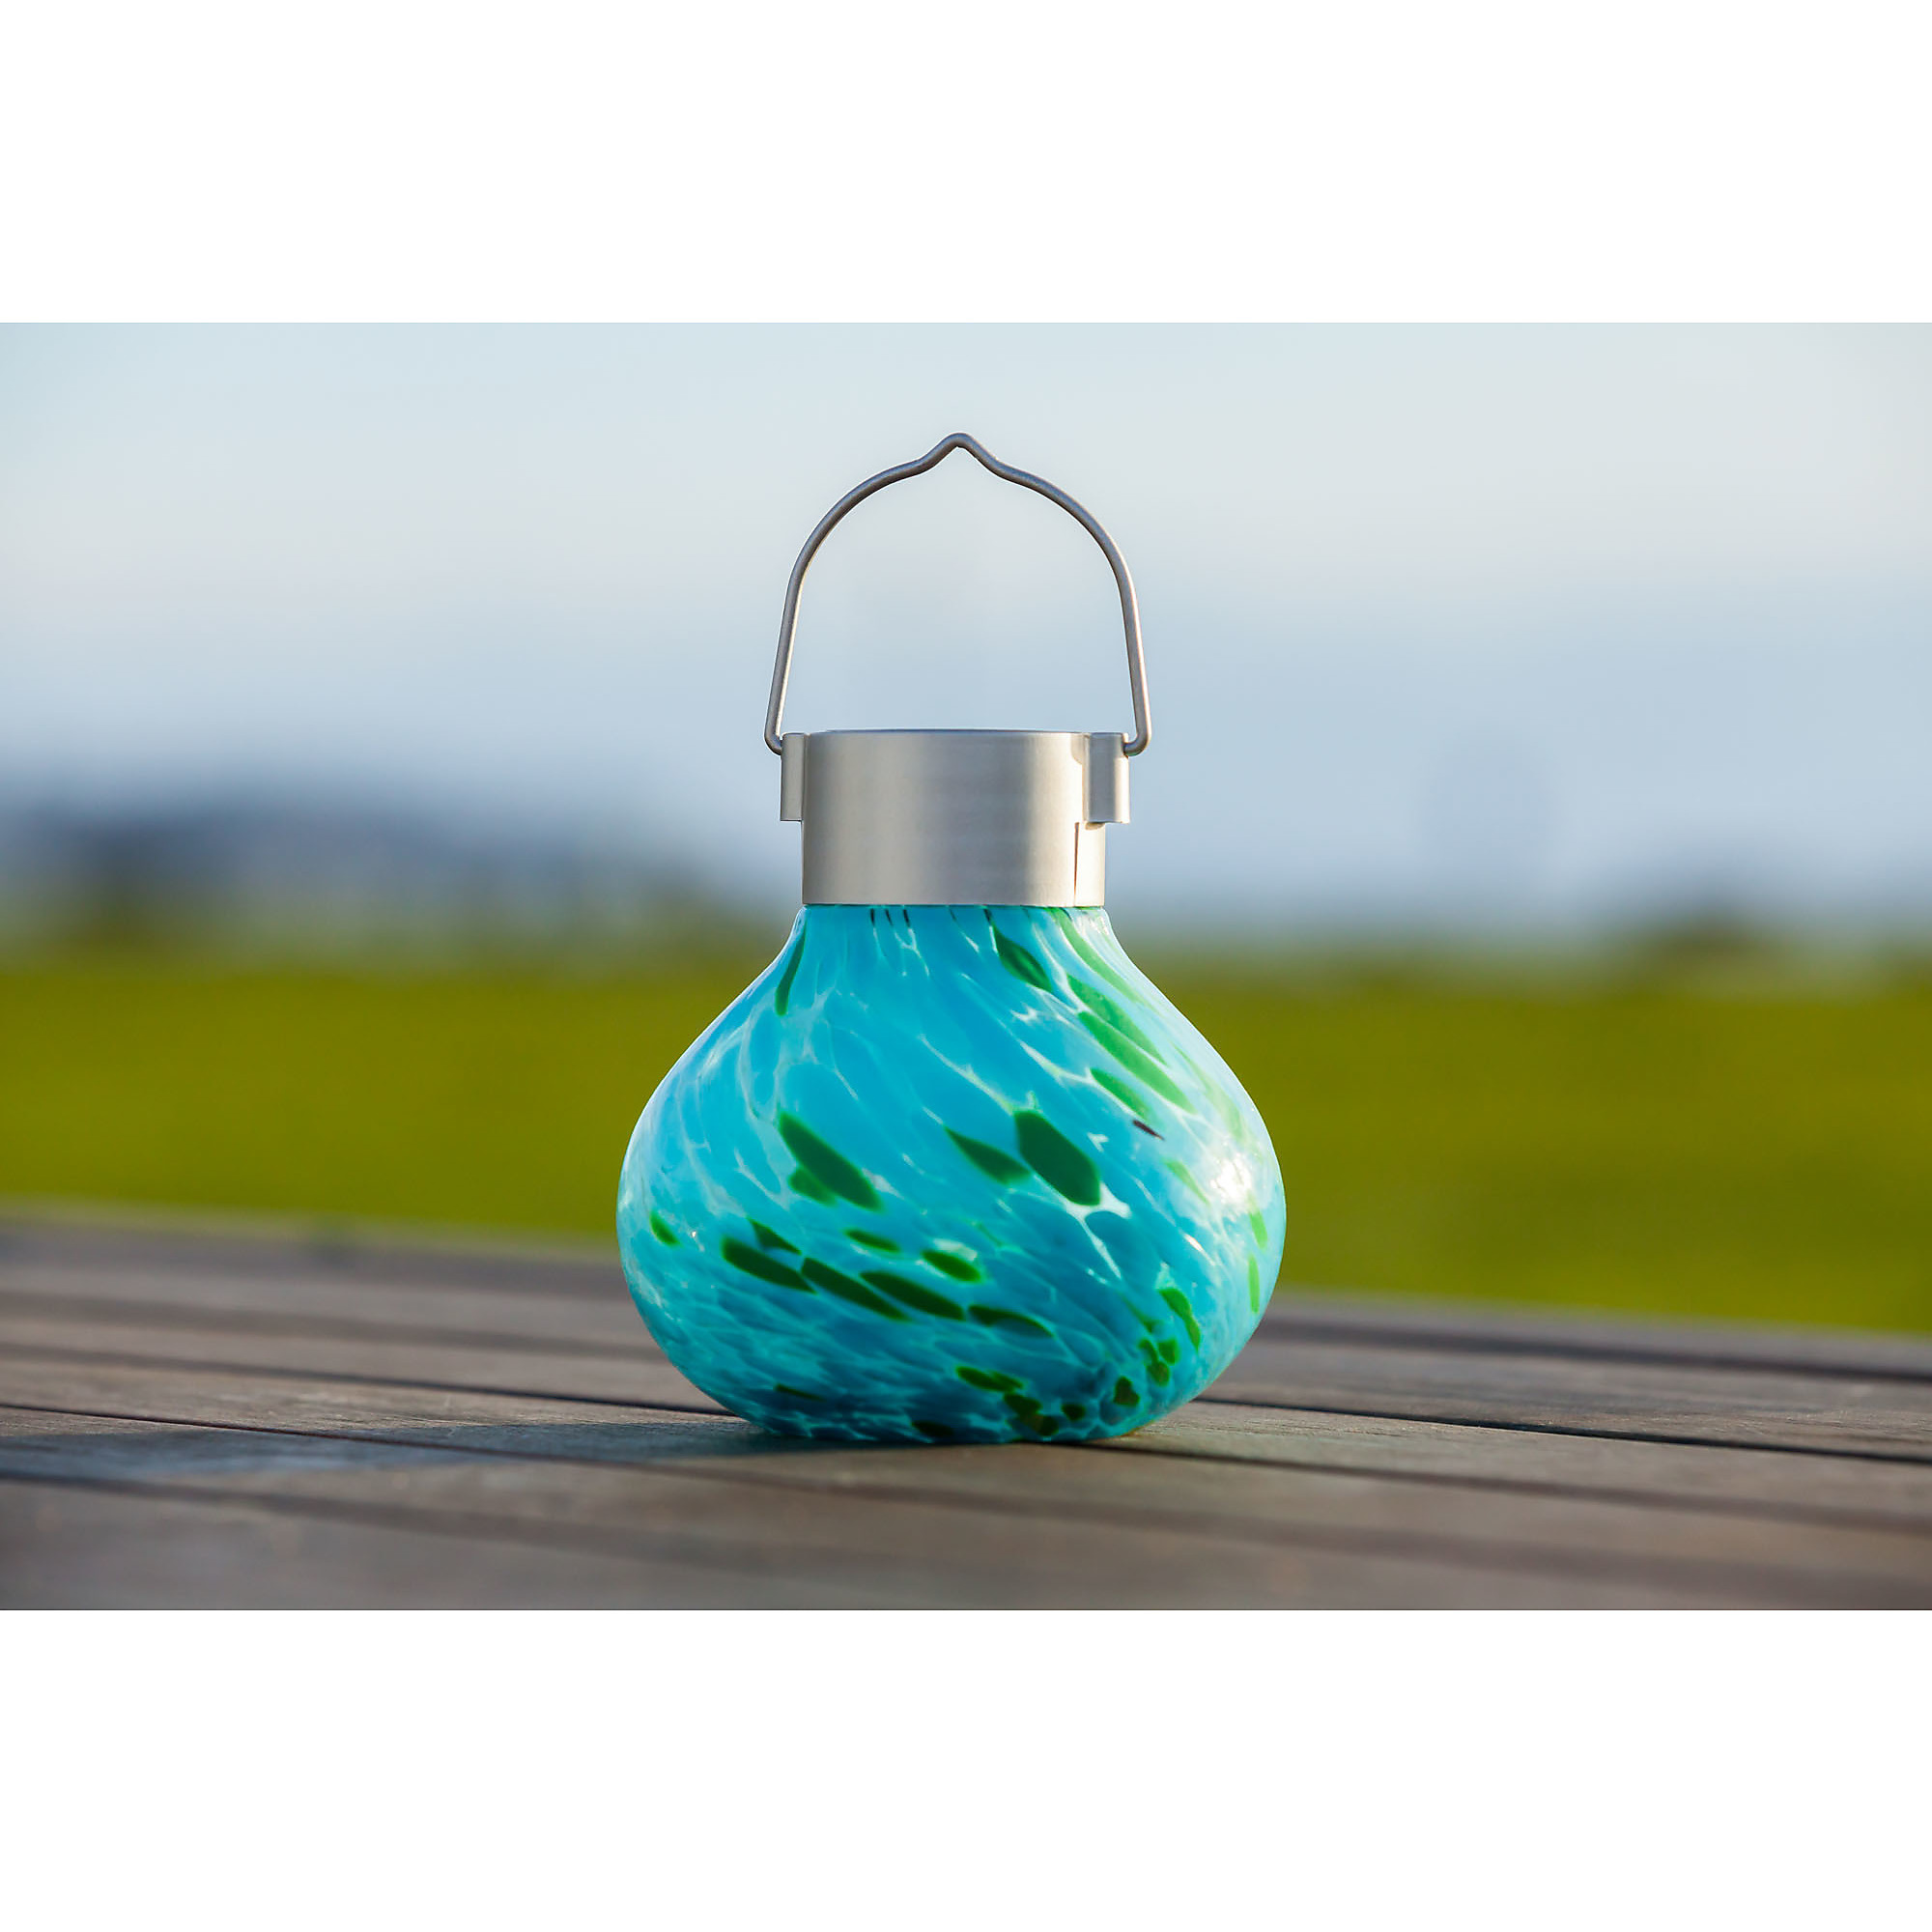 Allsop Home and Garden, Solar Glass Tea Lantern - Mint, Color Green, Included (qty.) 1 Model 30565